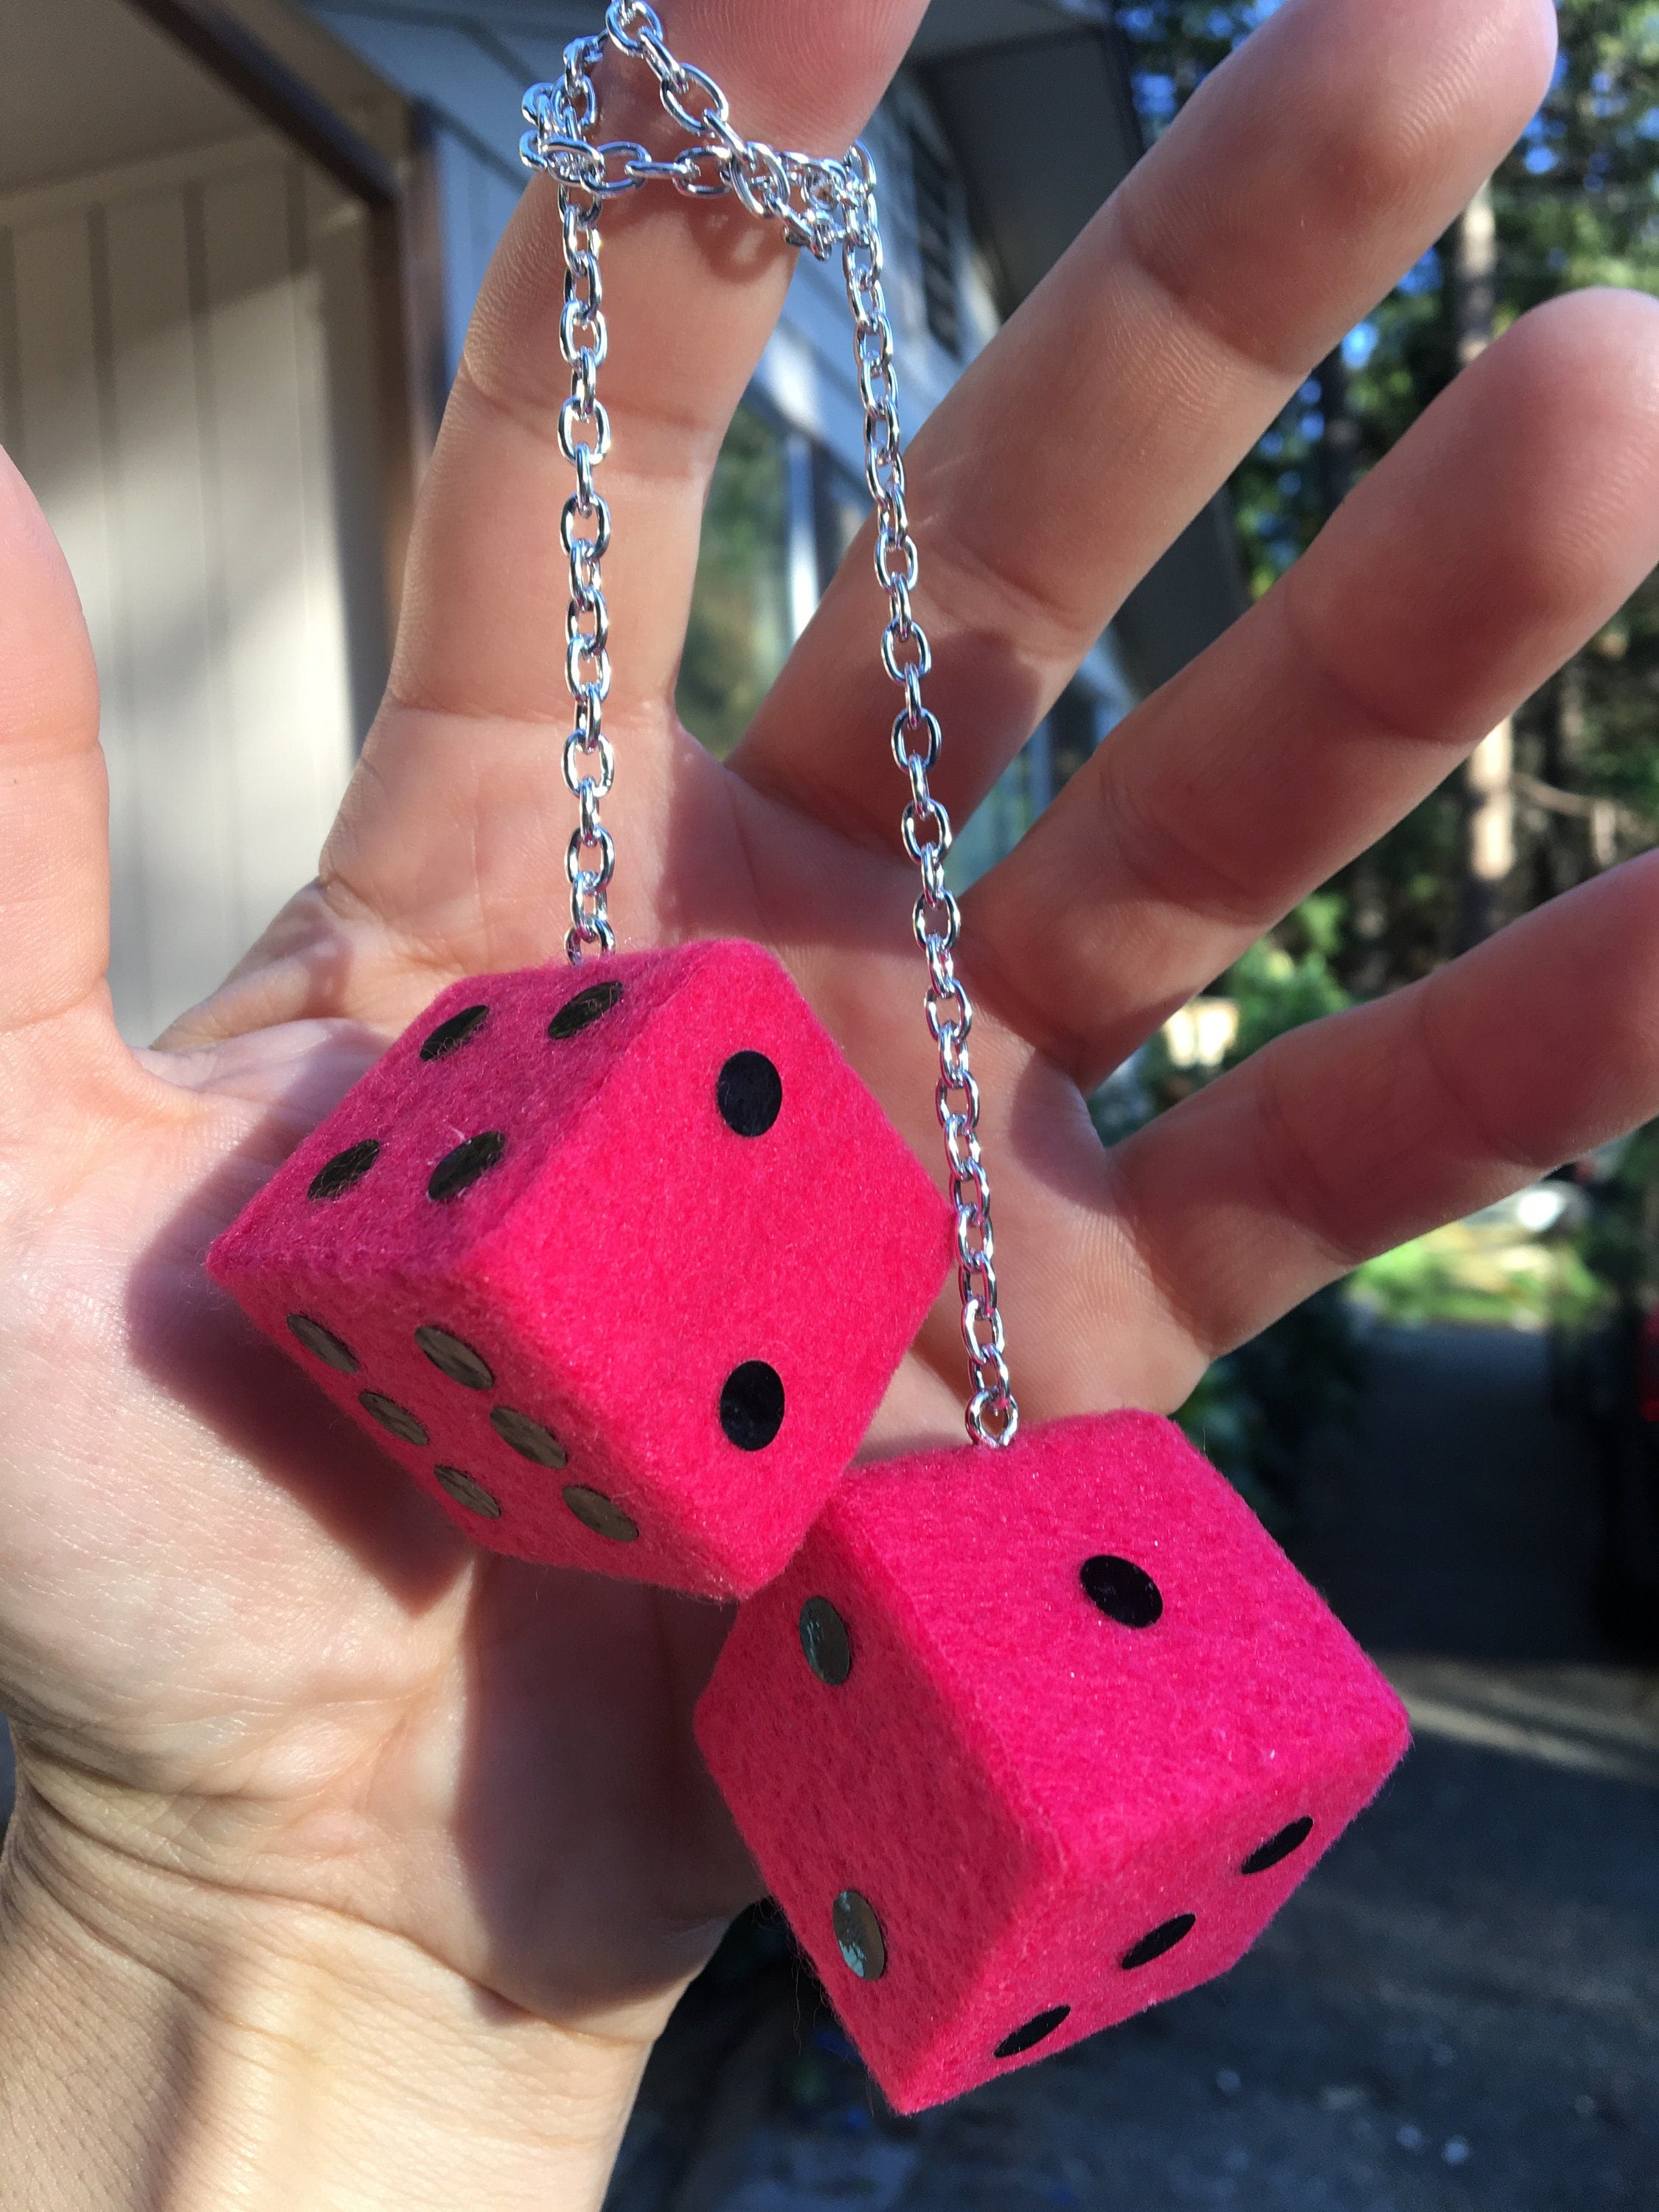 Shocking Pink Fuzzy Dice With Black Dots and Chain or Cord / Car  Accessories, Charms, Gift, Novelty, Mirror Danglers, Pink Car Accessories 